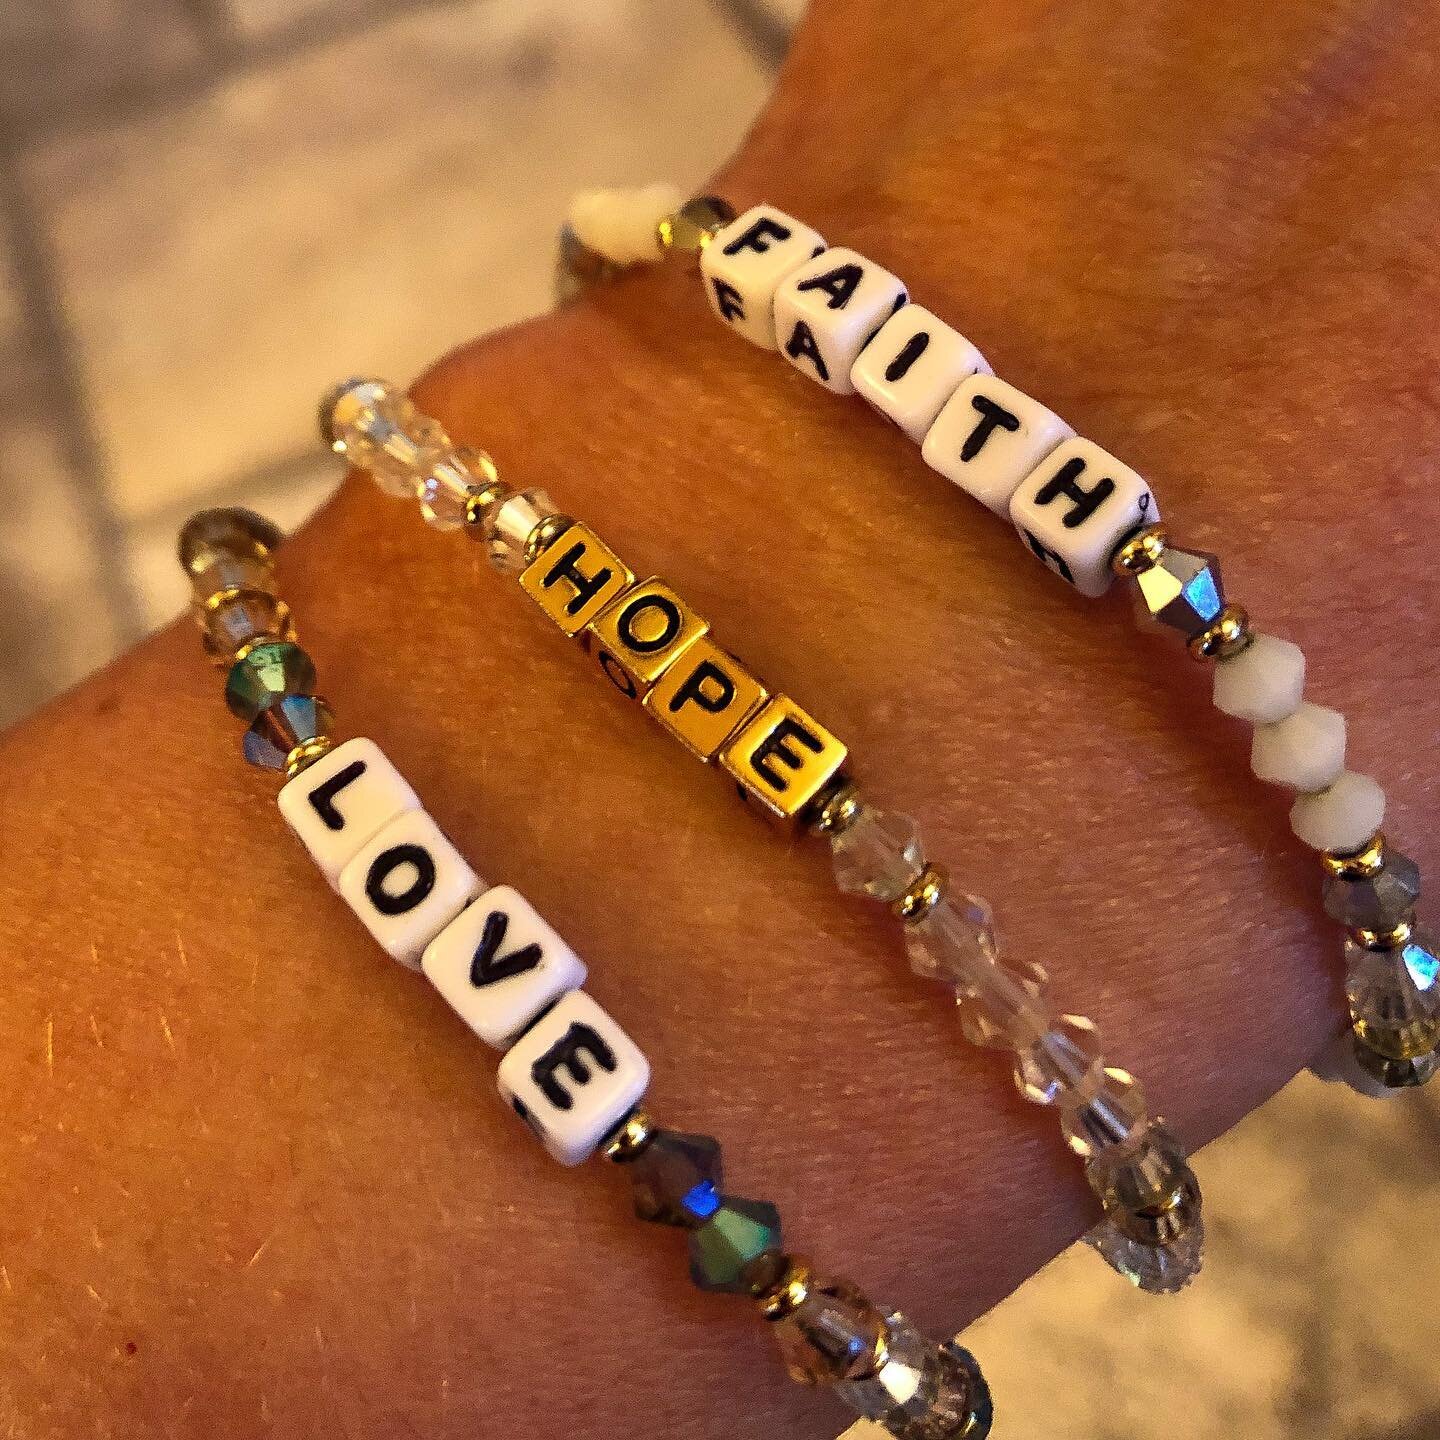 I gave my mother these 3 bracelets to wear while she fought cancer. Now I&rsquo;m wearing them as I go through my own cancer journey. I wish so much that she could have been by my side during this ordeal, and yet I&rsquo;m also grateful that she was 